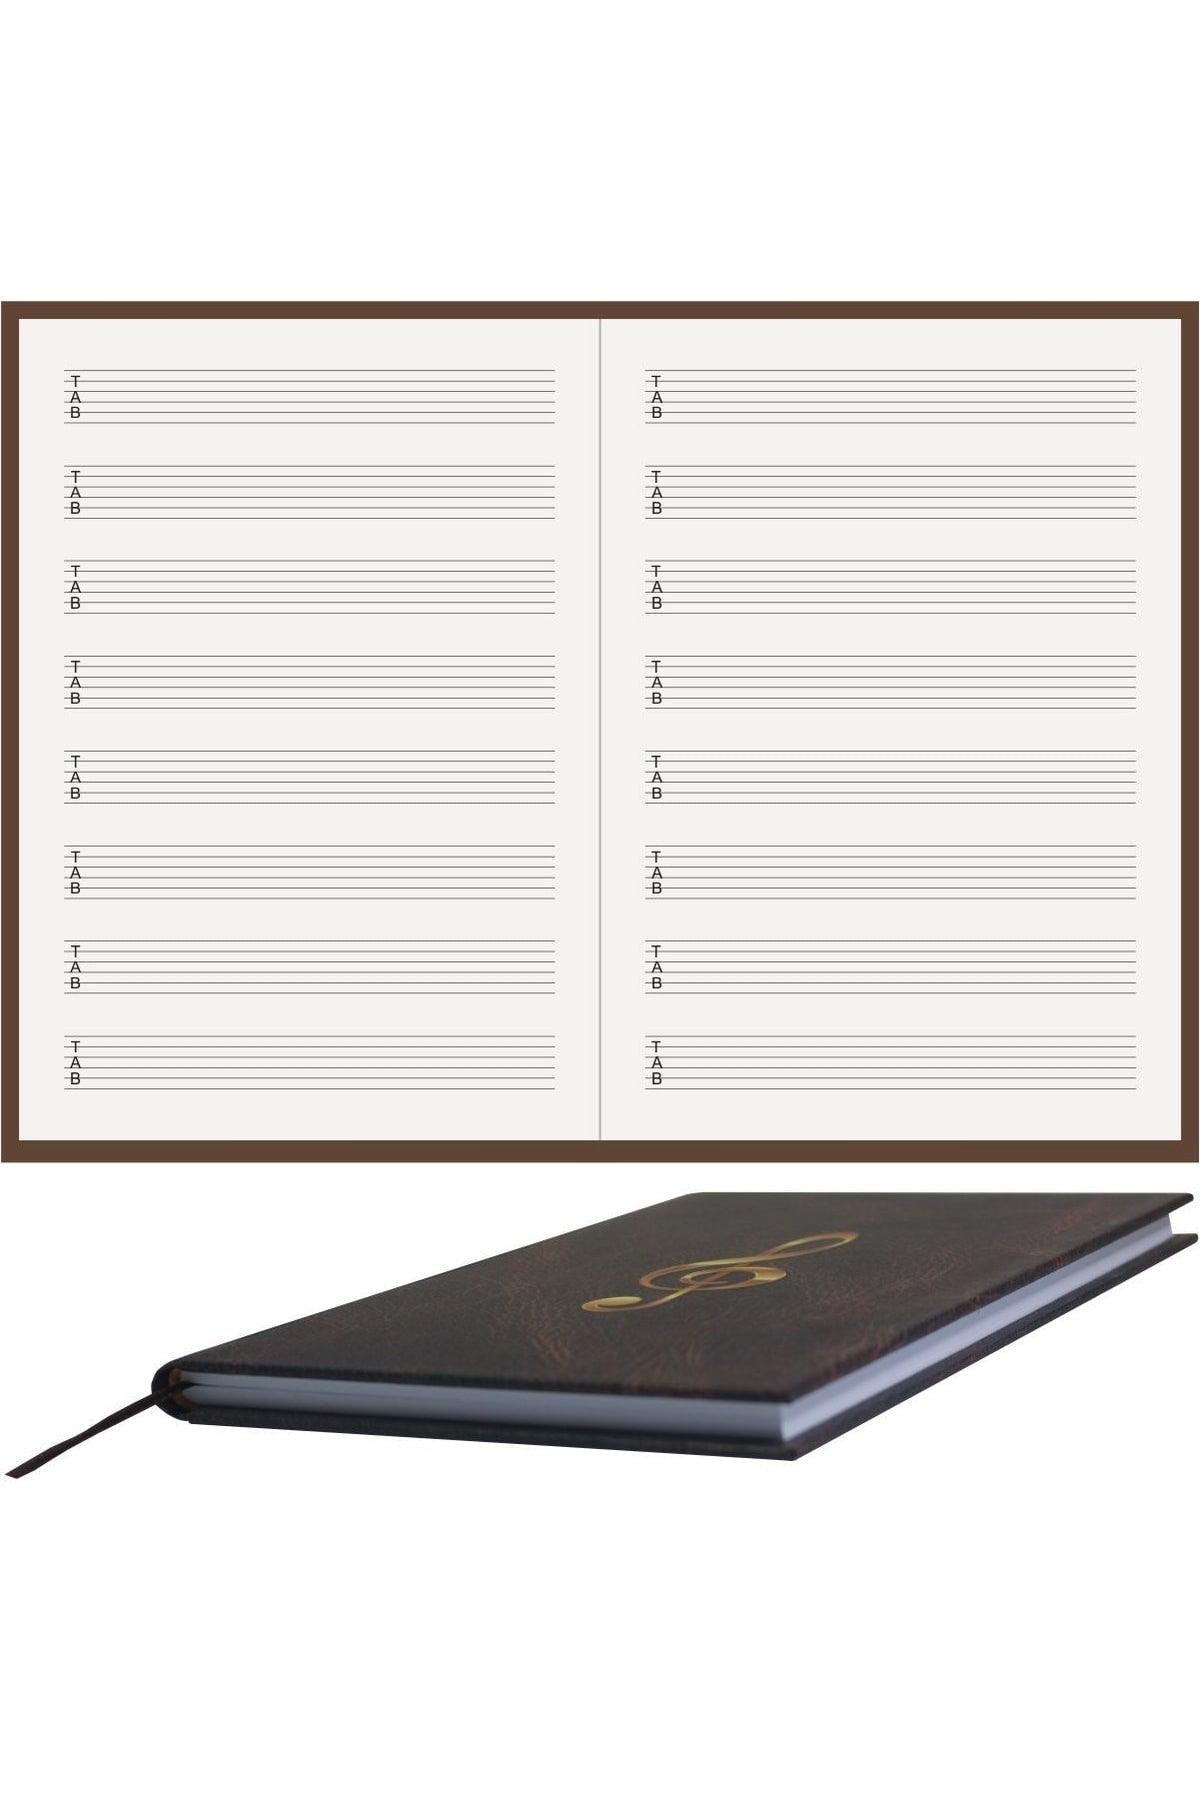 Guitar Music Notepad (with tab Key) -